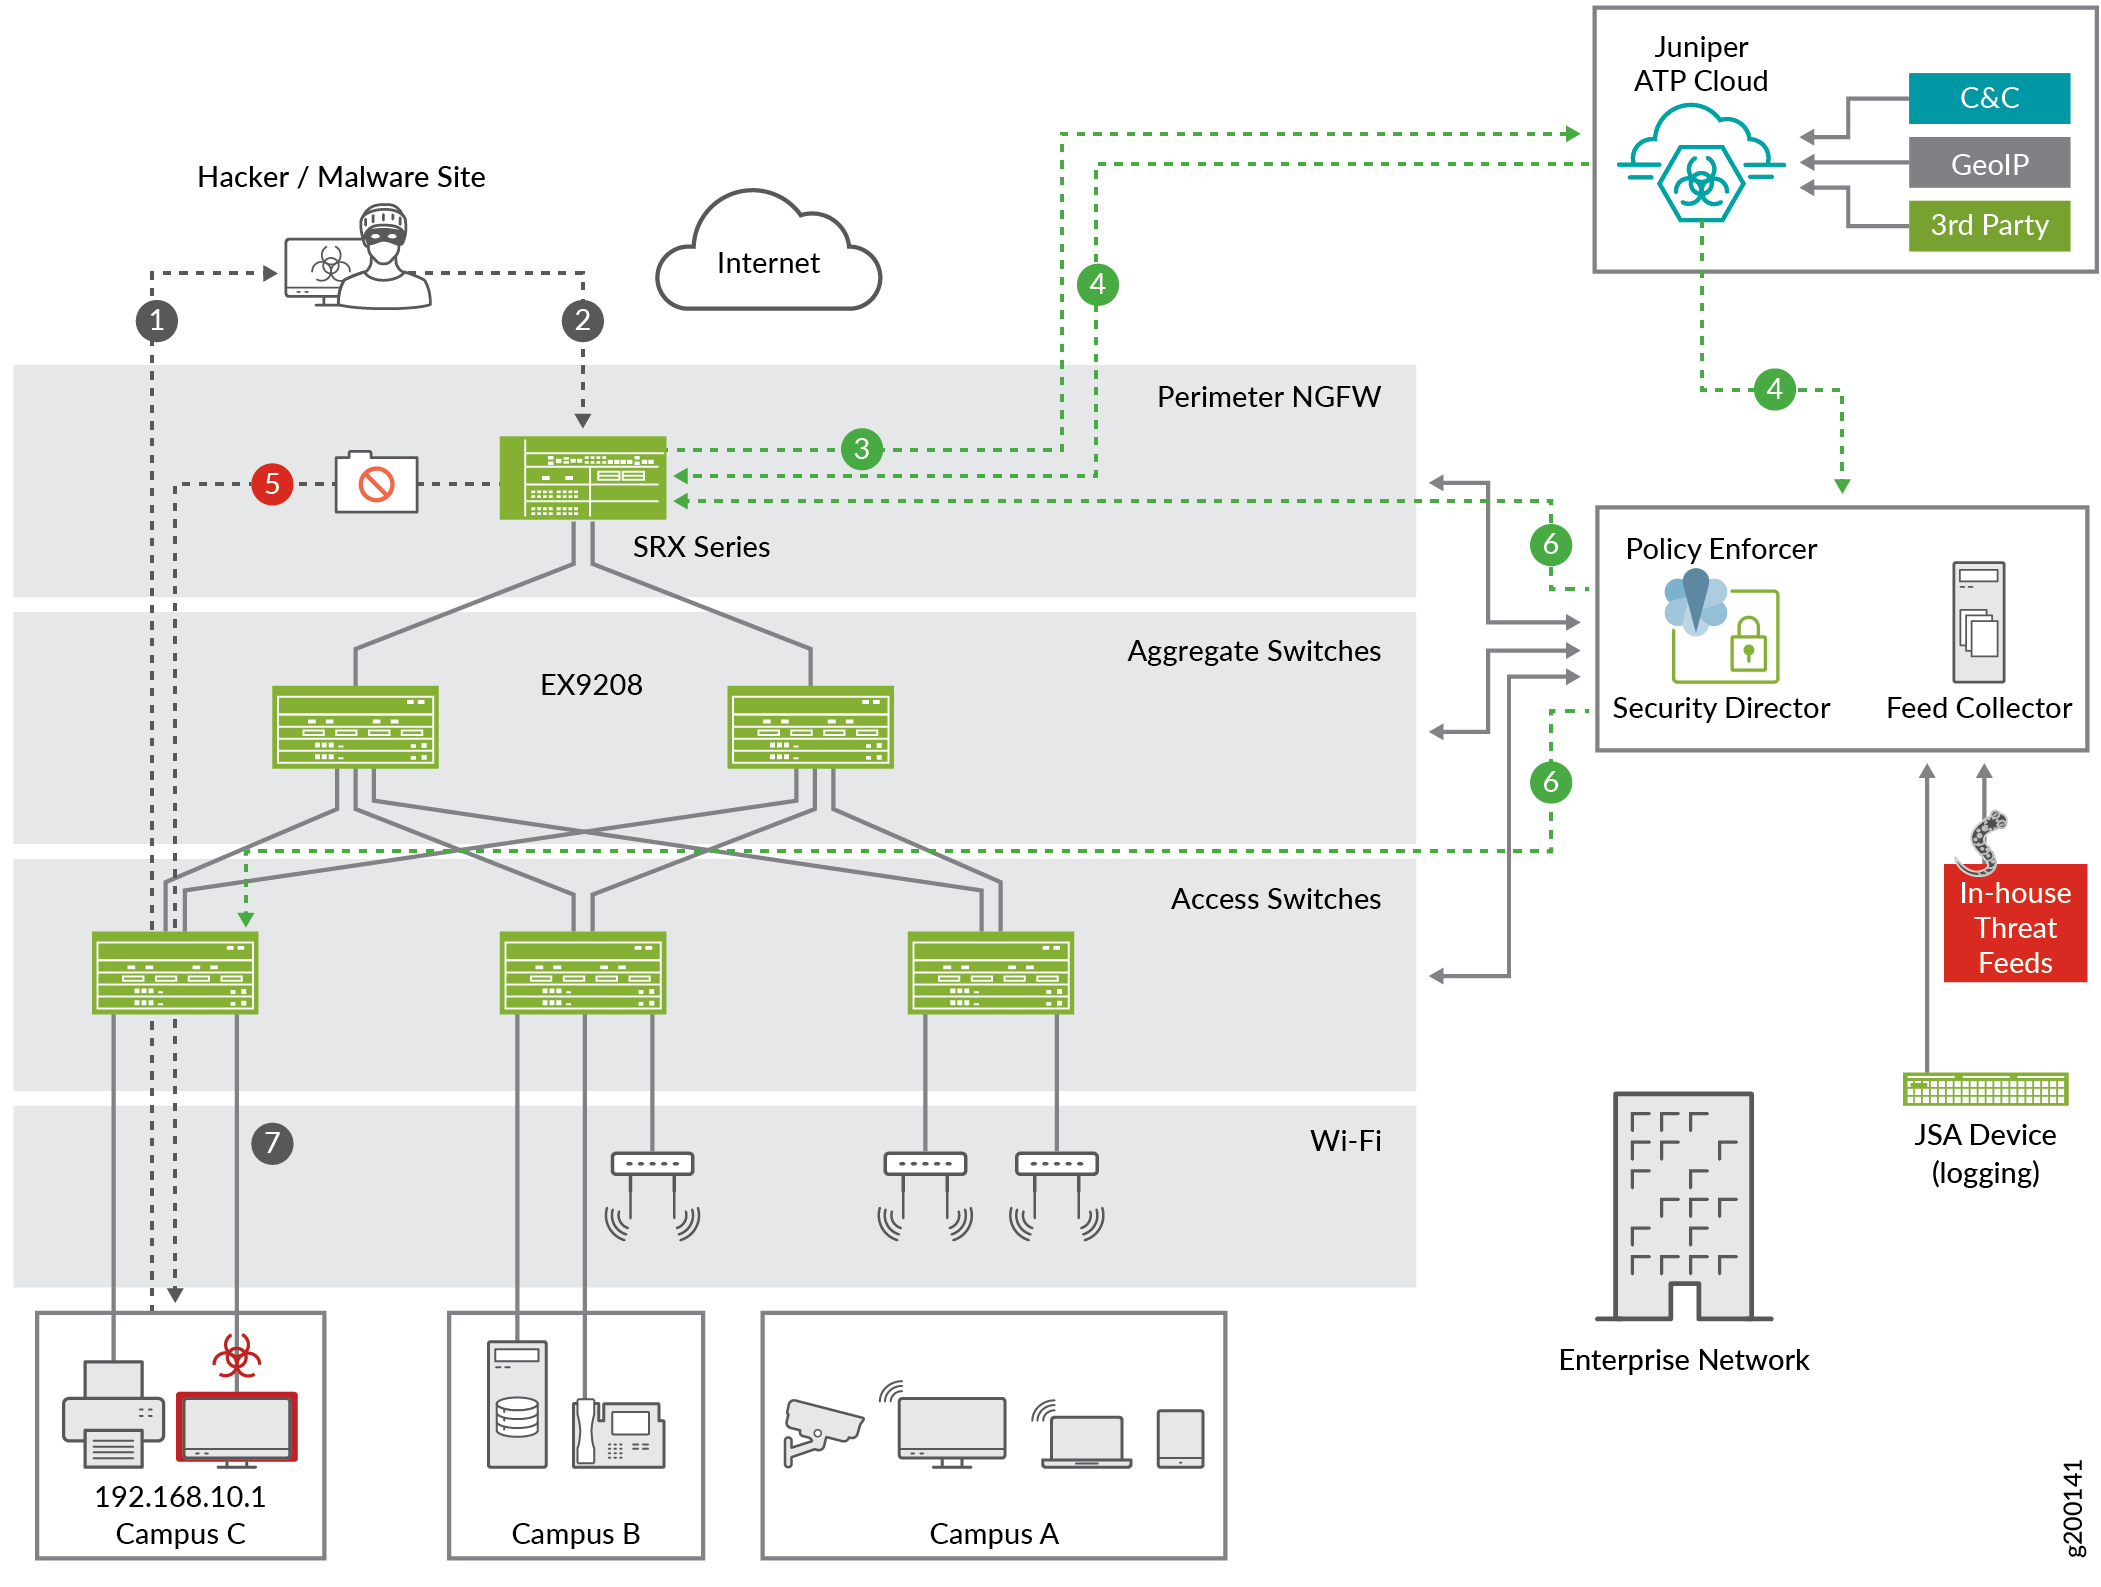 Juniper Connected
Security Workflow - Detecting an Infected Endpoint